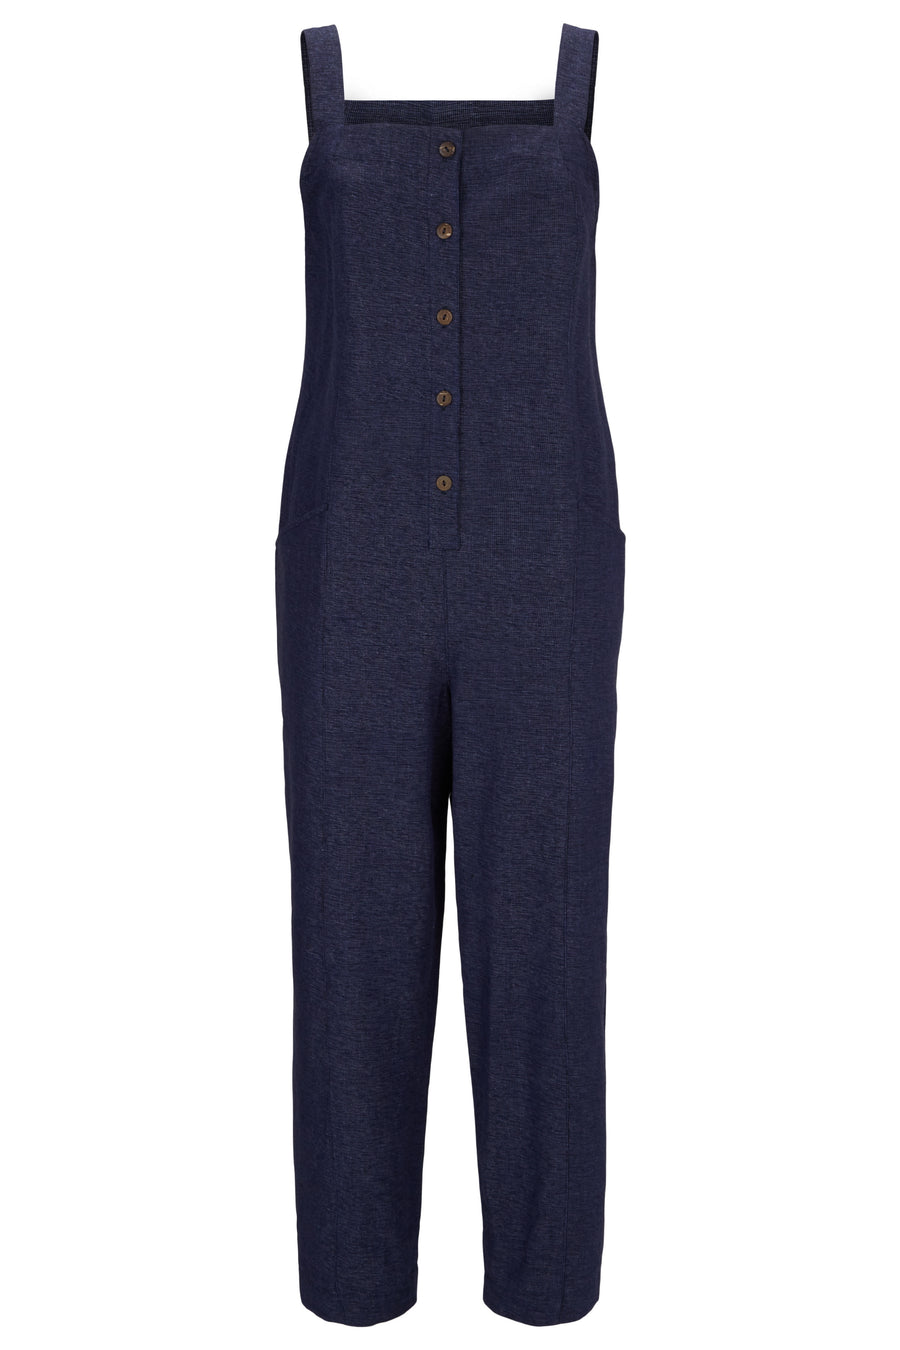 People Tree Fair Trade, Ethical & Sustainable Tessie Jumpsuit in Navy 100% Organic Cotton